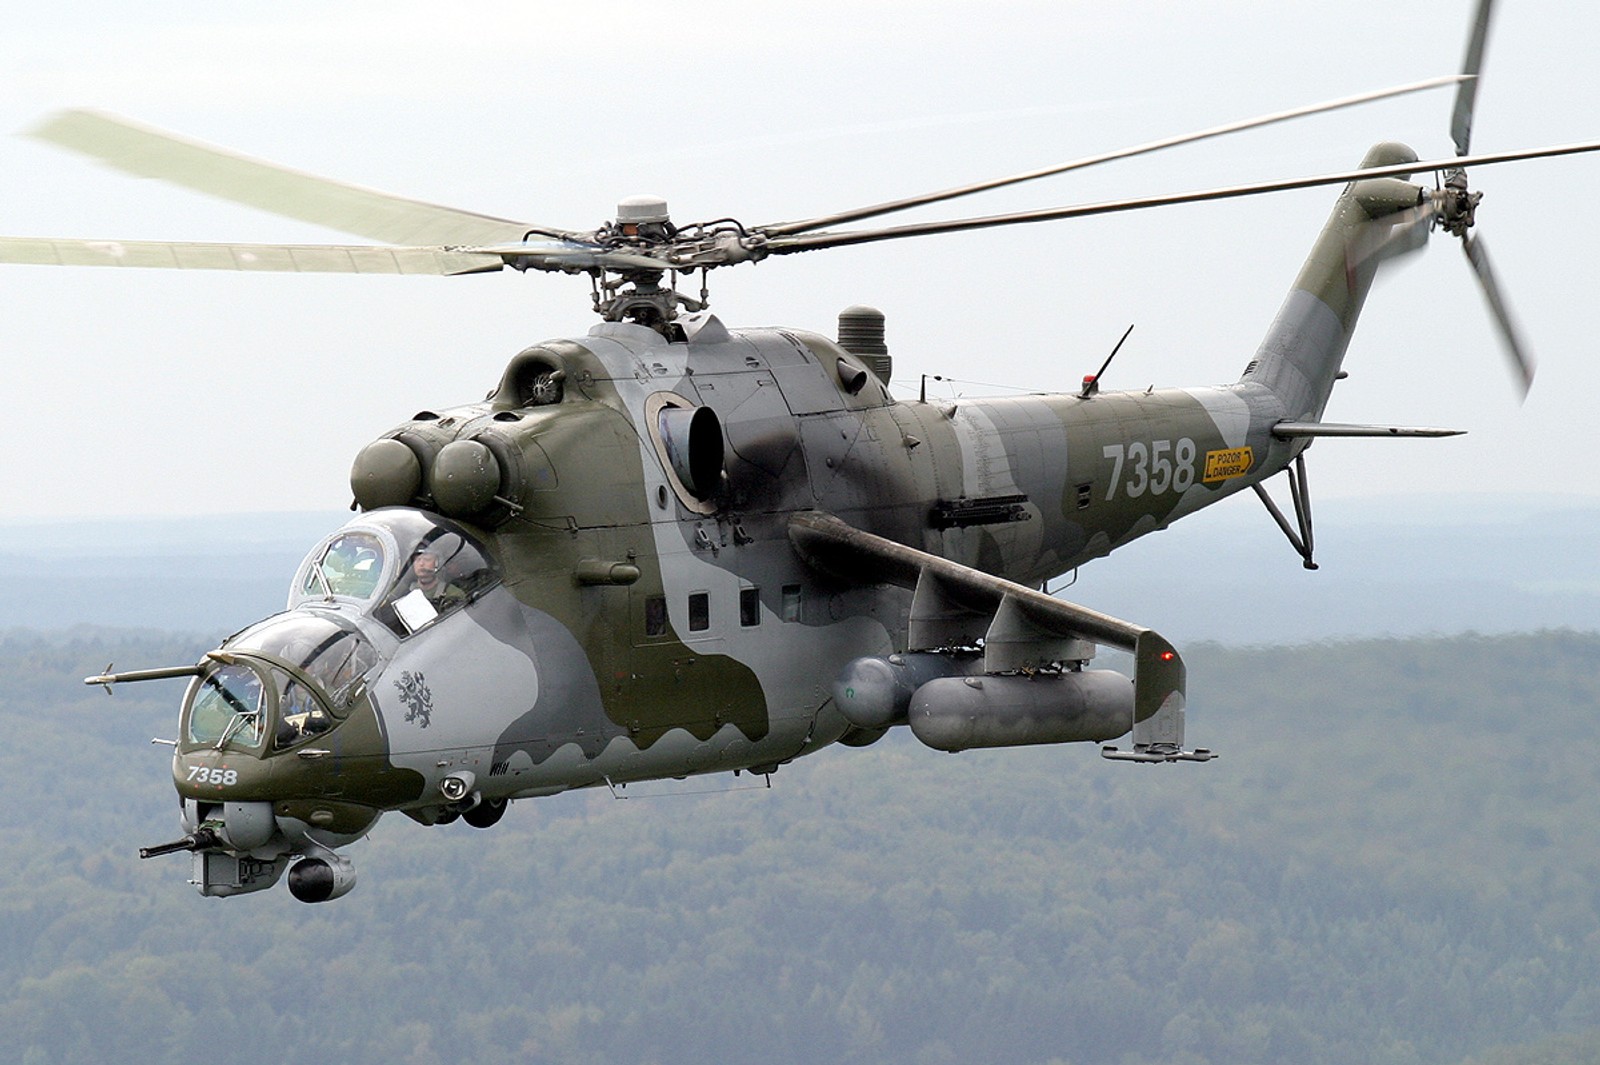 General 1600x1065 Mil Mi-24 helicopters military attack helicopters aircraft military aircraft military vehicle numbers vehicle Czech Air Force Mil Helicopters Russian/Soviet aircraft